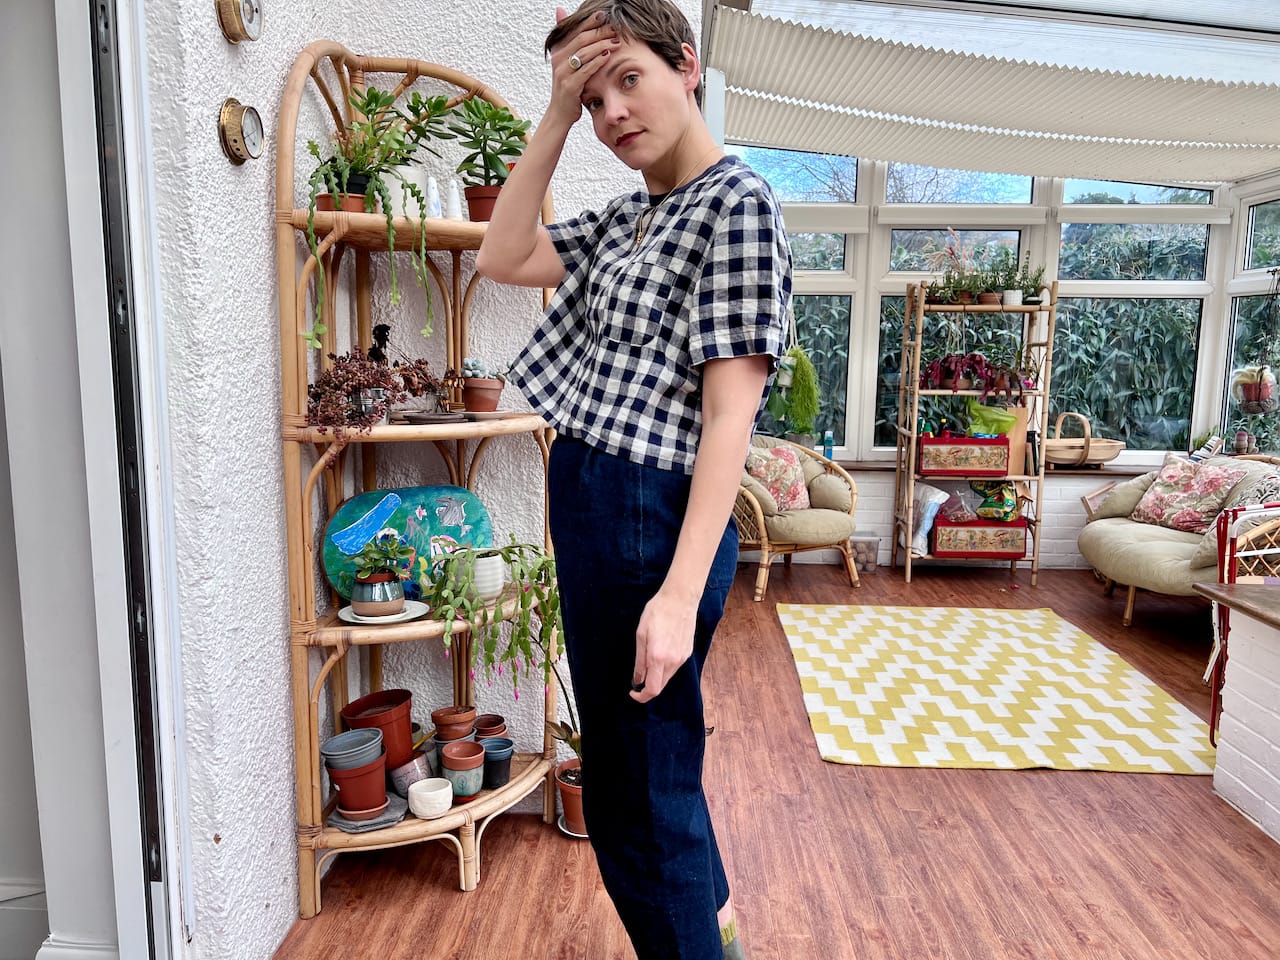 Me in conservatory wearing Navy Blue gingham t-shirt